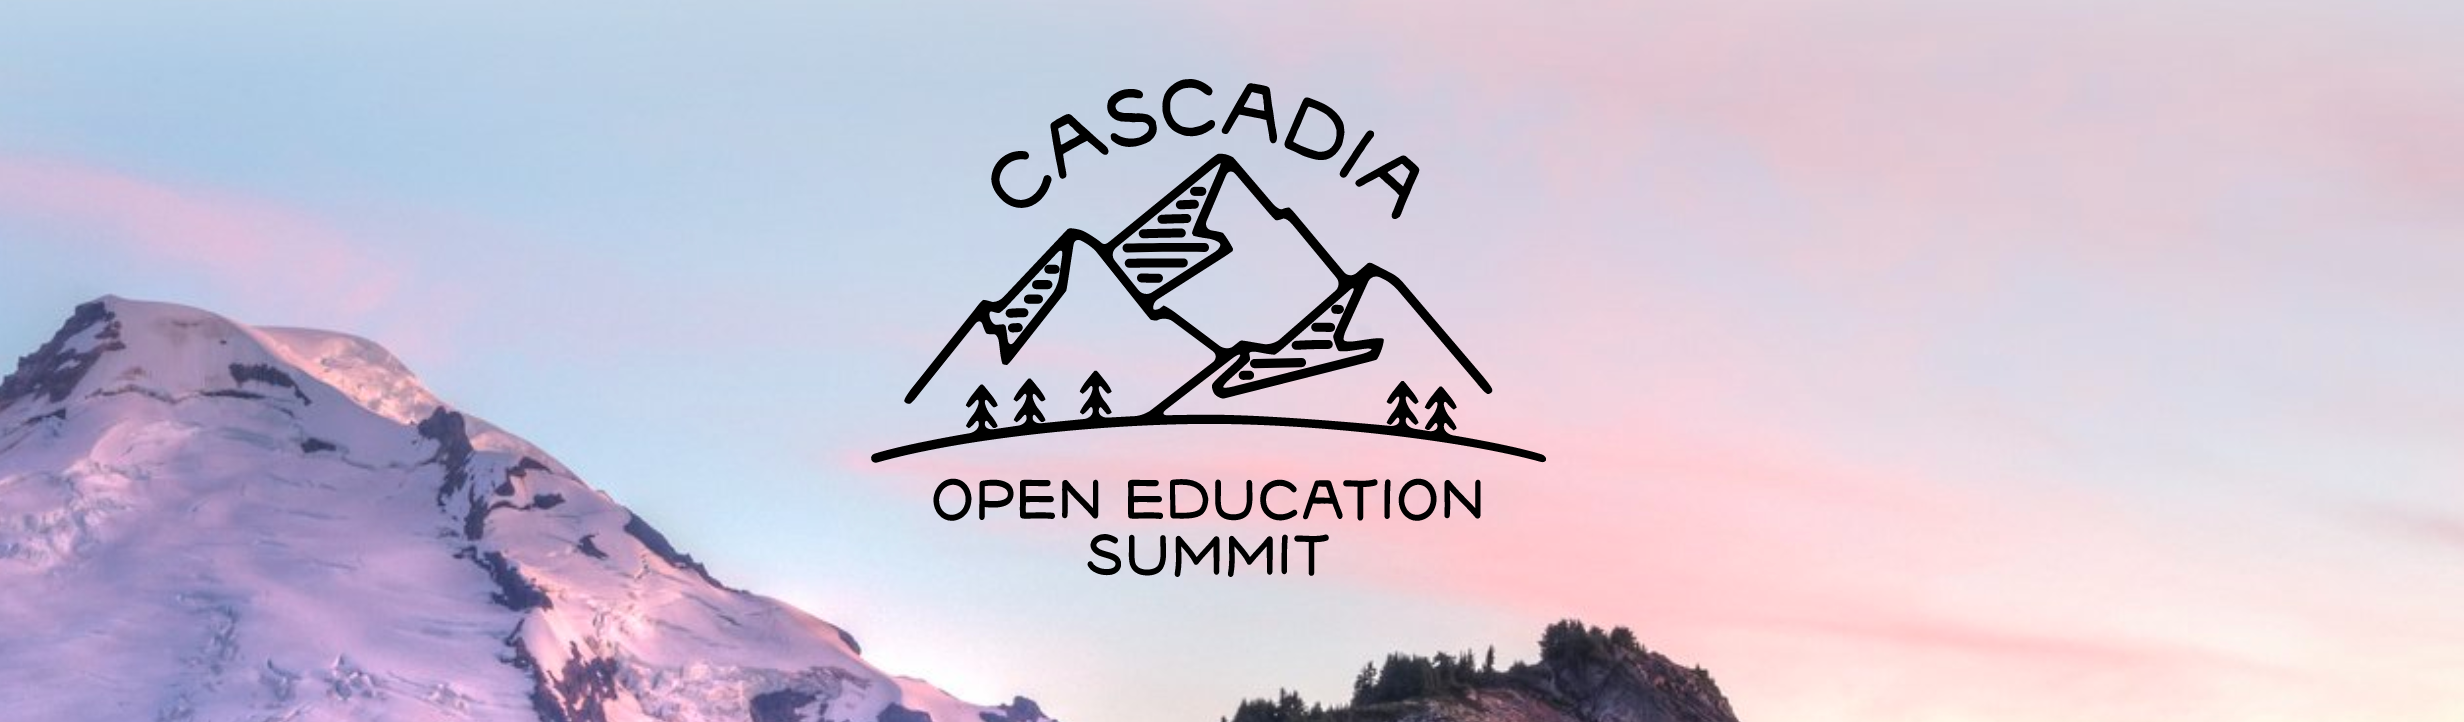 Cascadia OpenEd conference